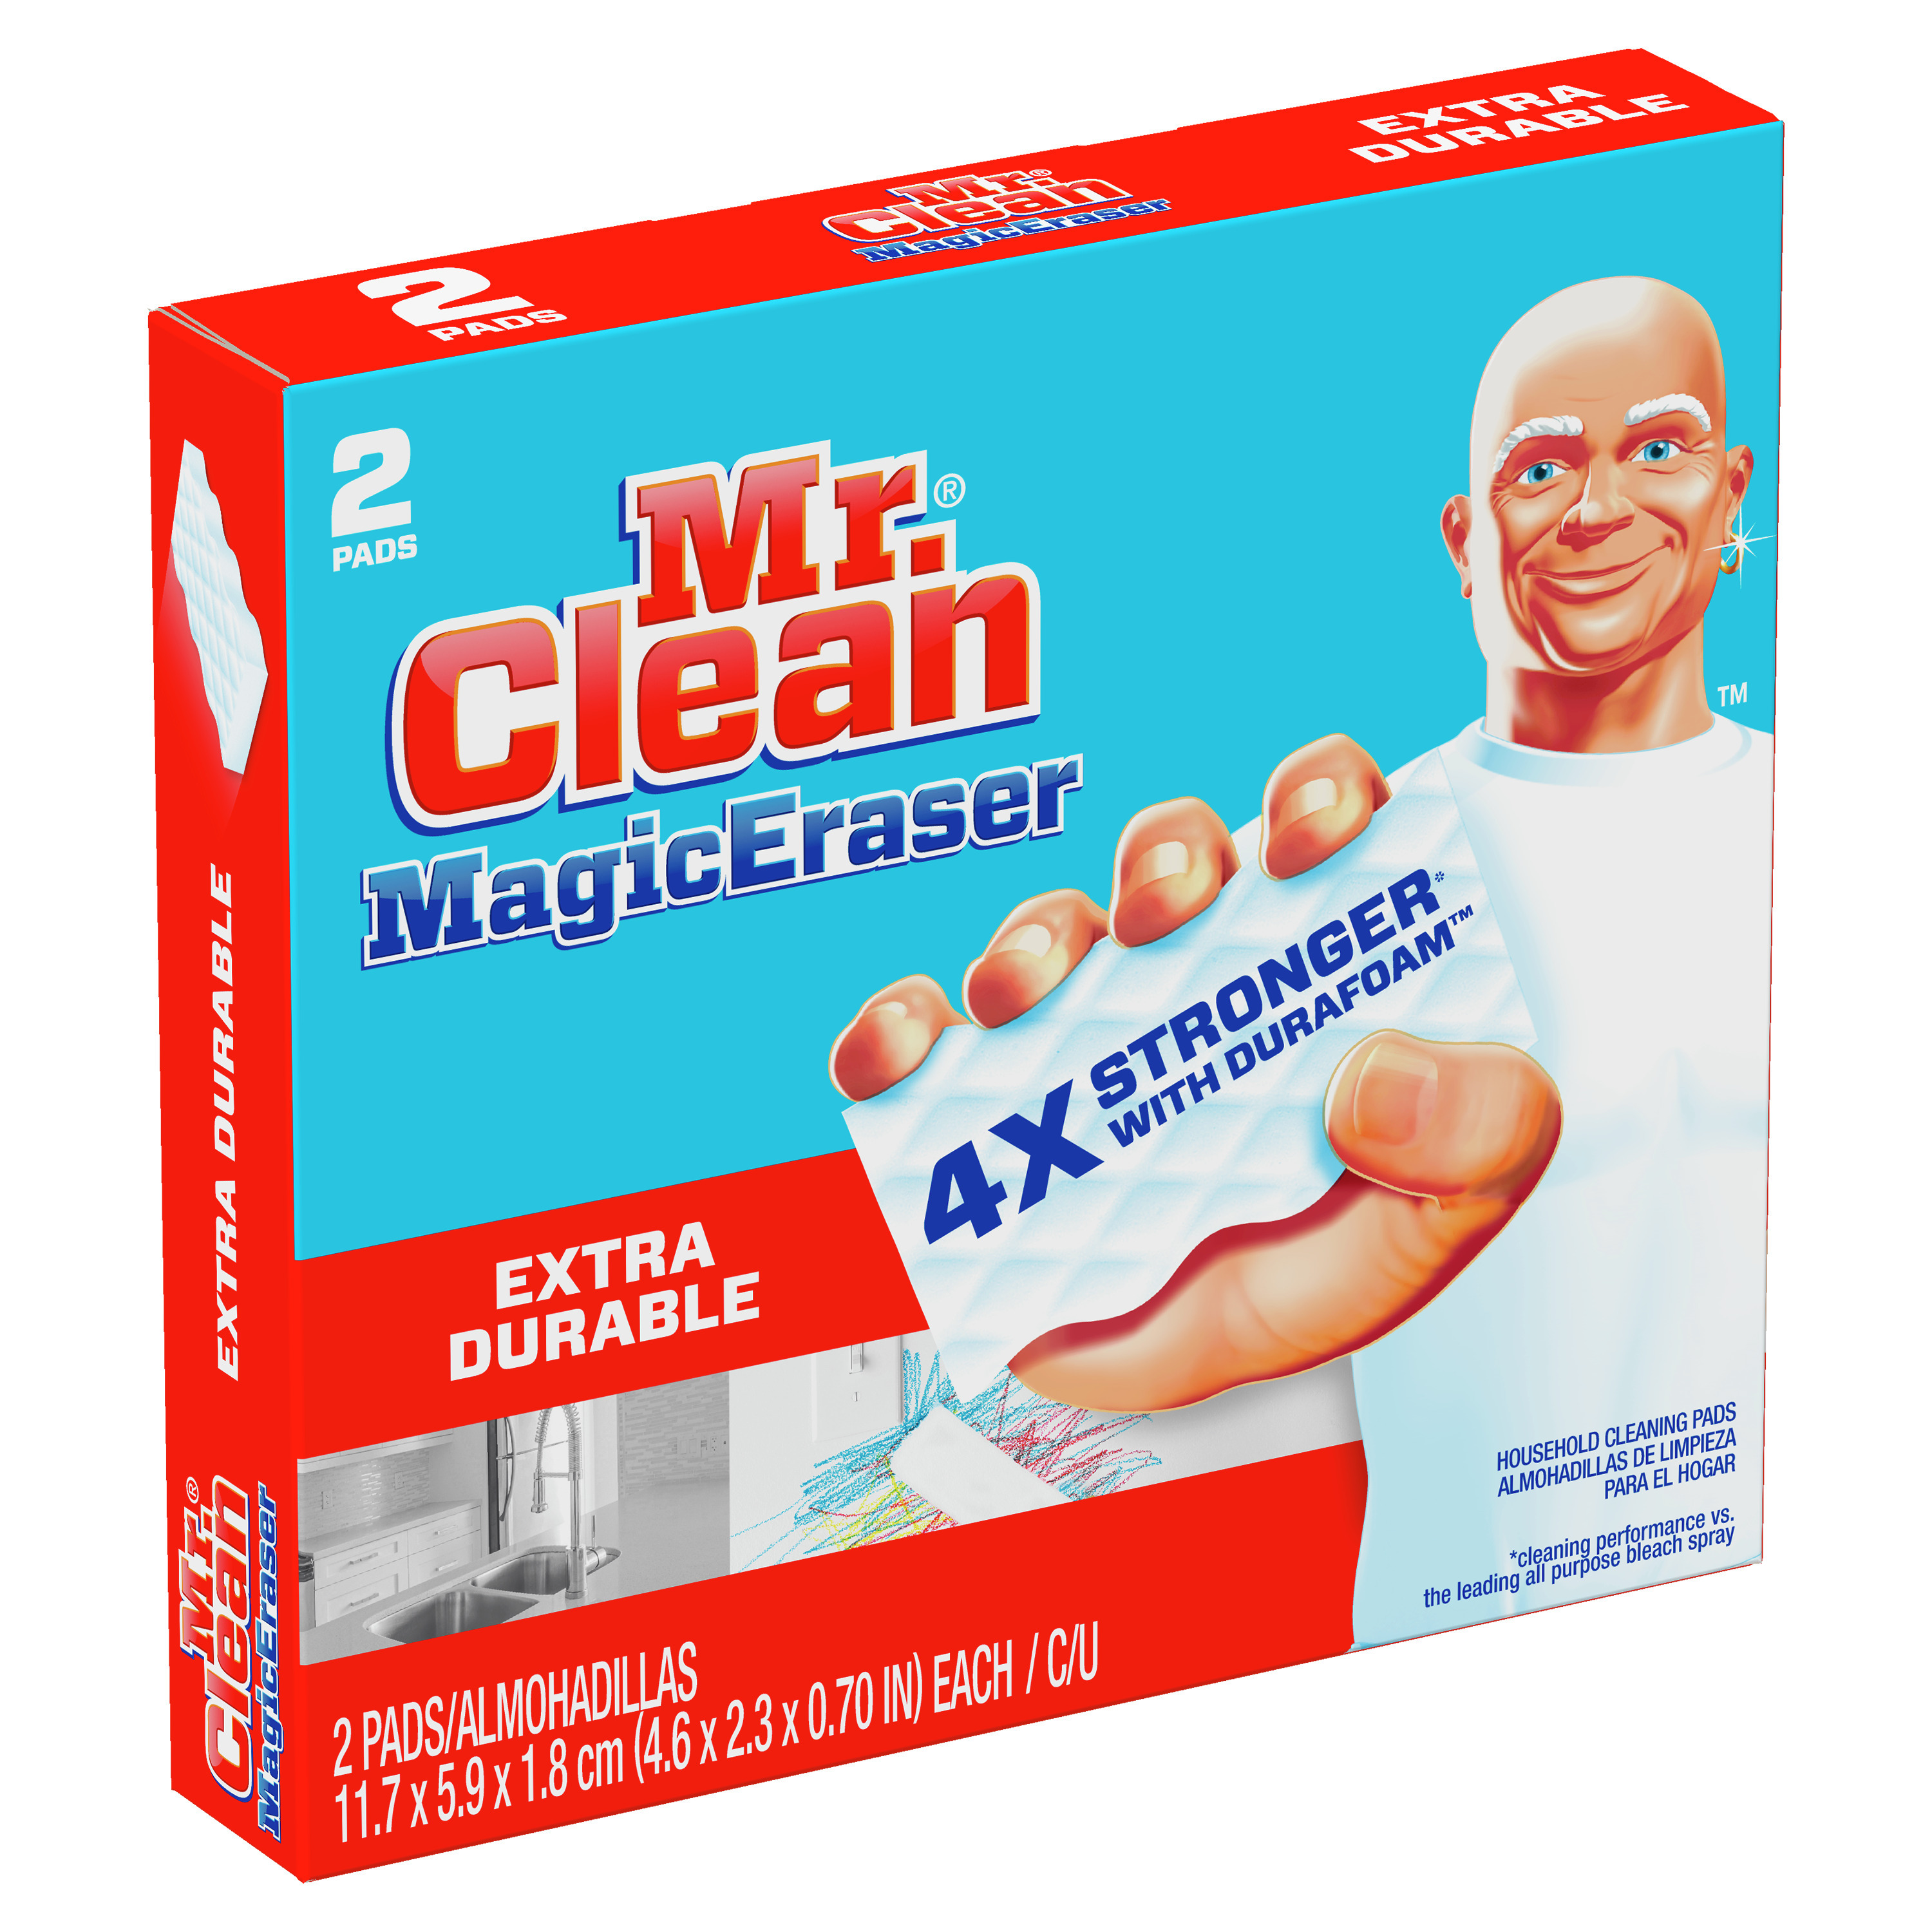 Mr. Clean Magic Eraser Extra Durable, Cleaning Pads with Durafoam, 2 Ct - image 4 of 11